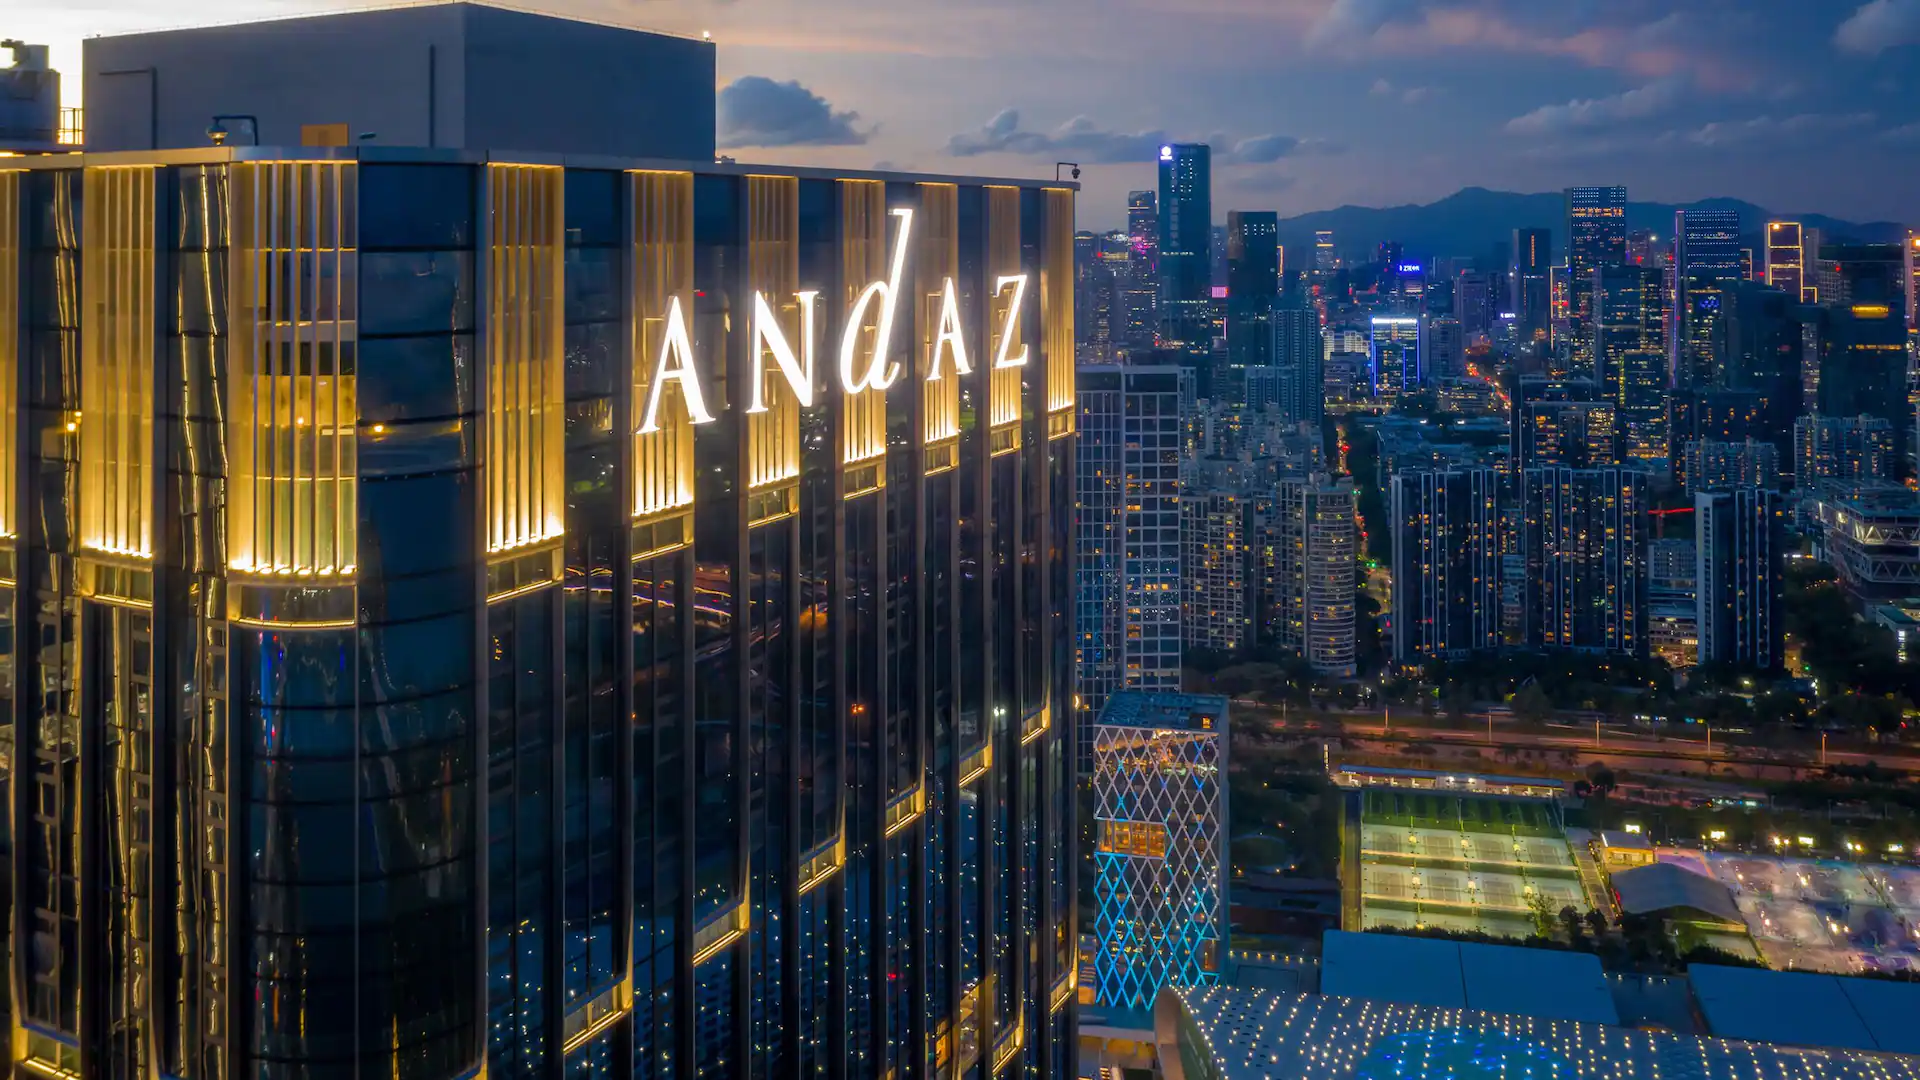 Featured image for “Andaz Shenzhen Bay”